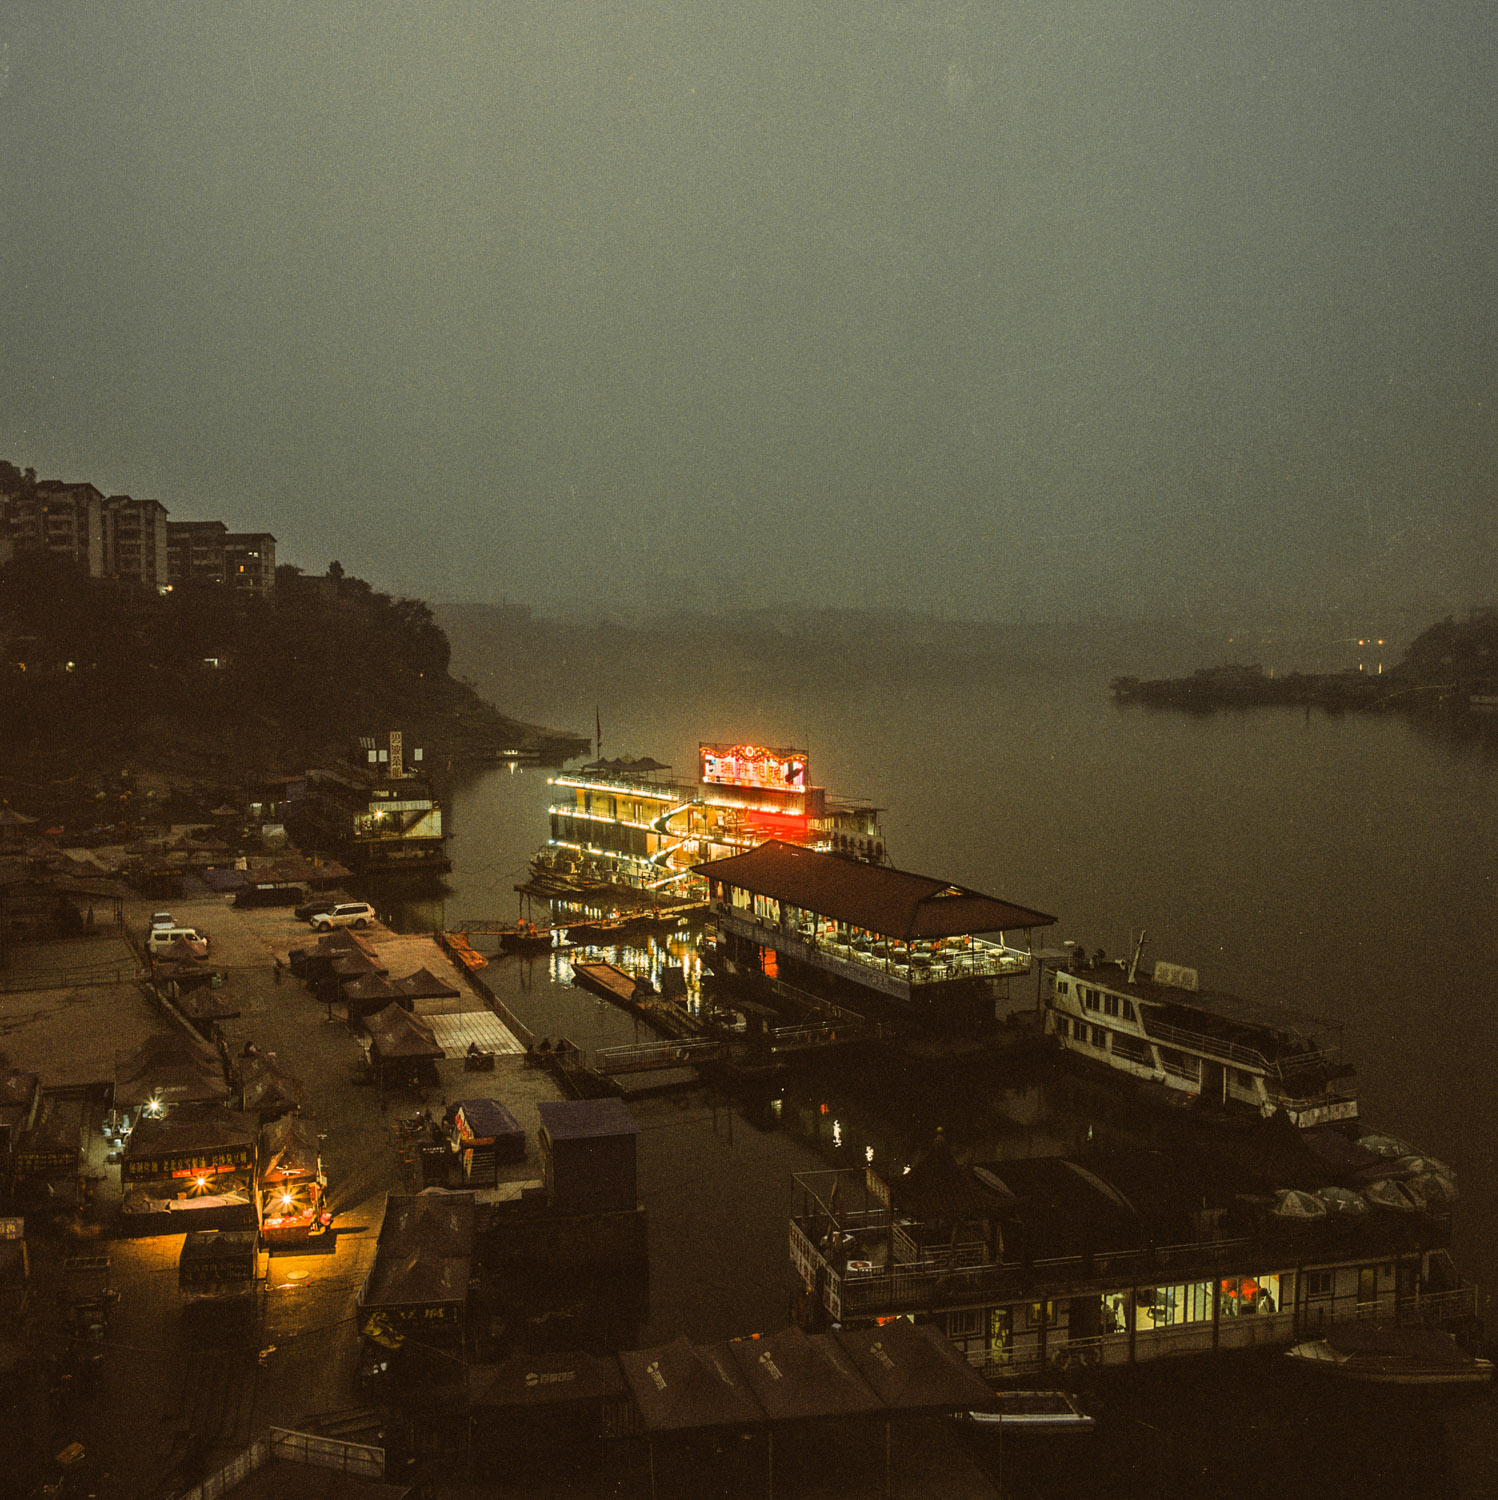 Restaurant on Jia Ling river